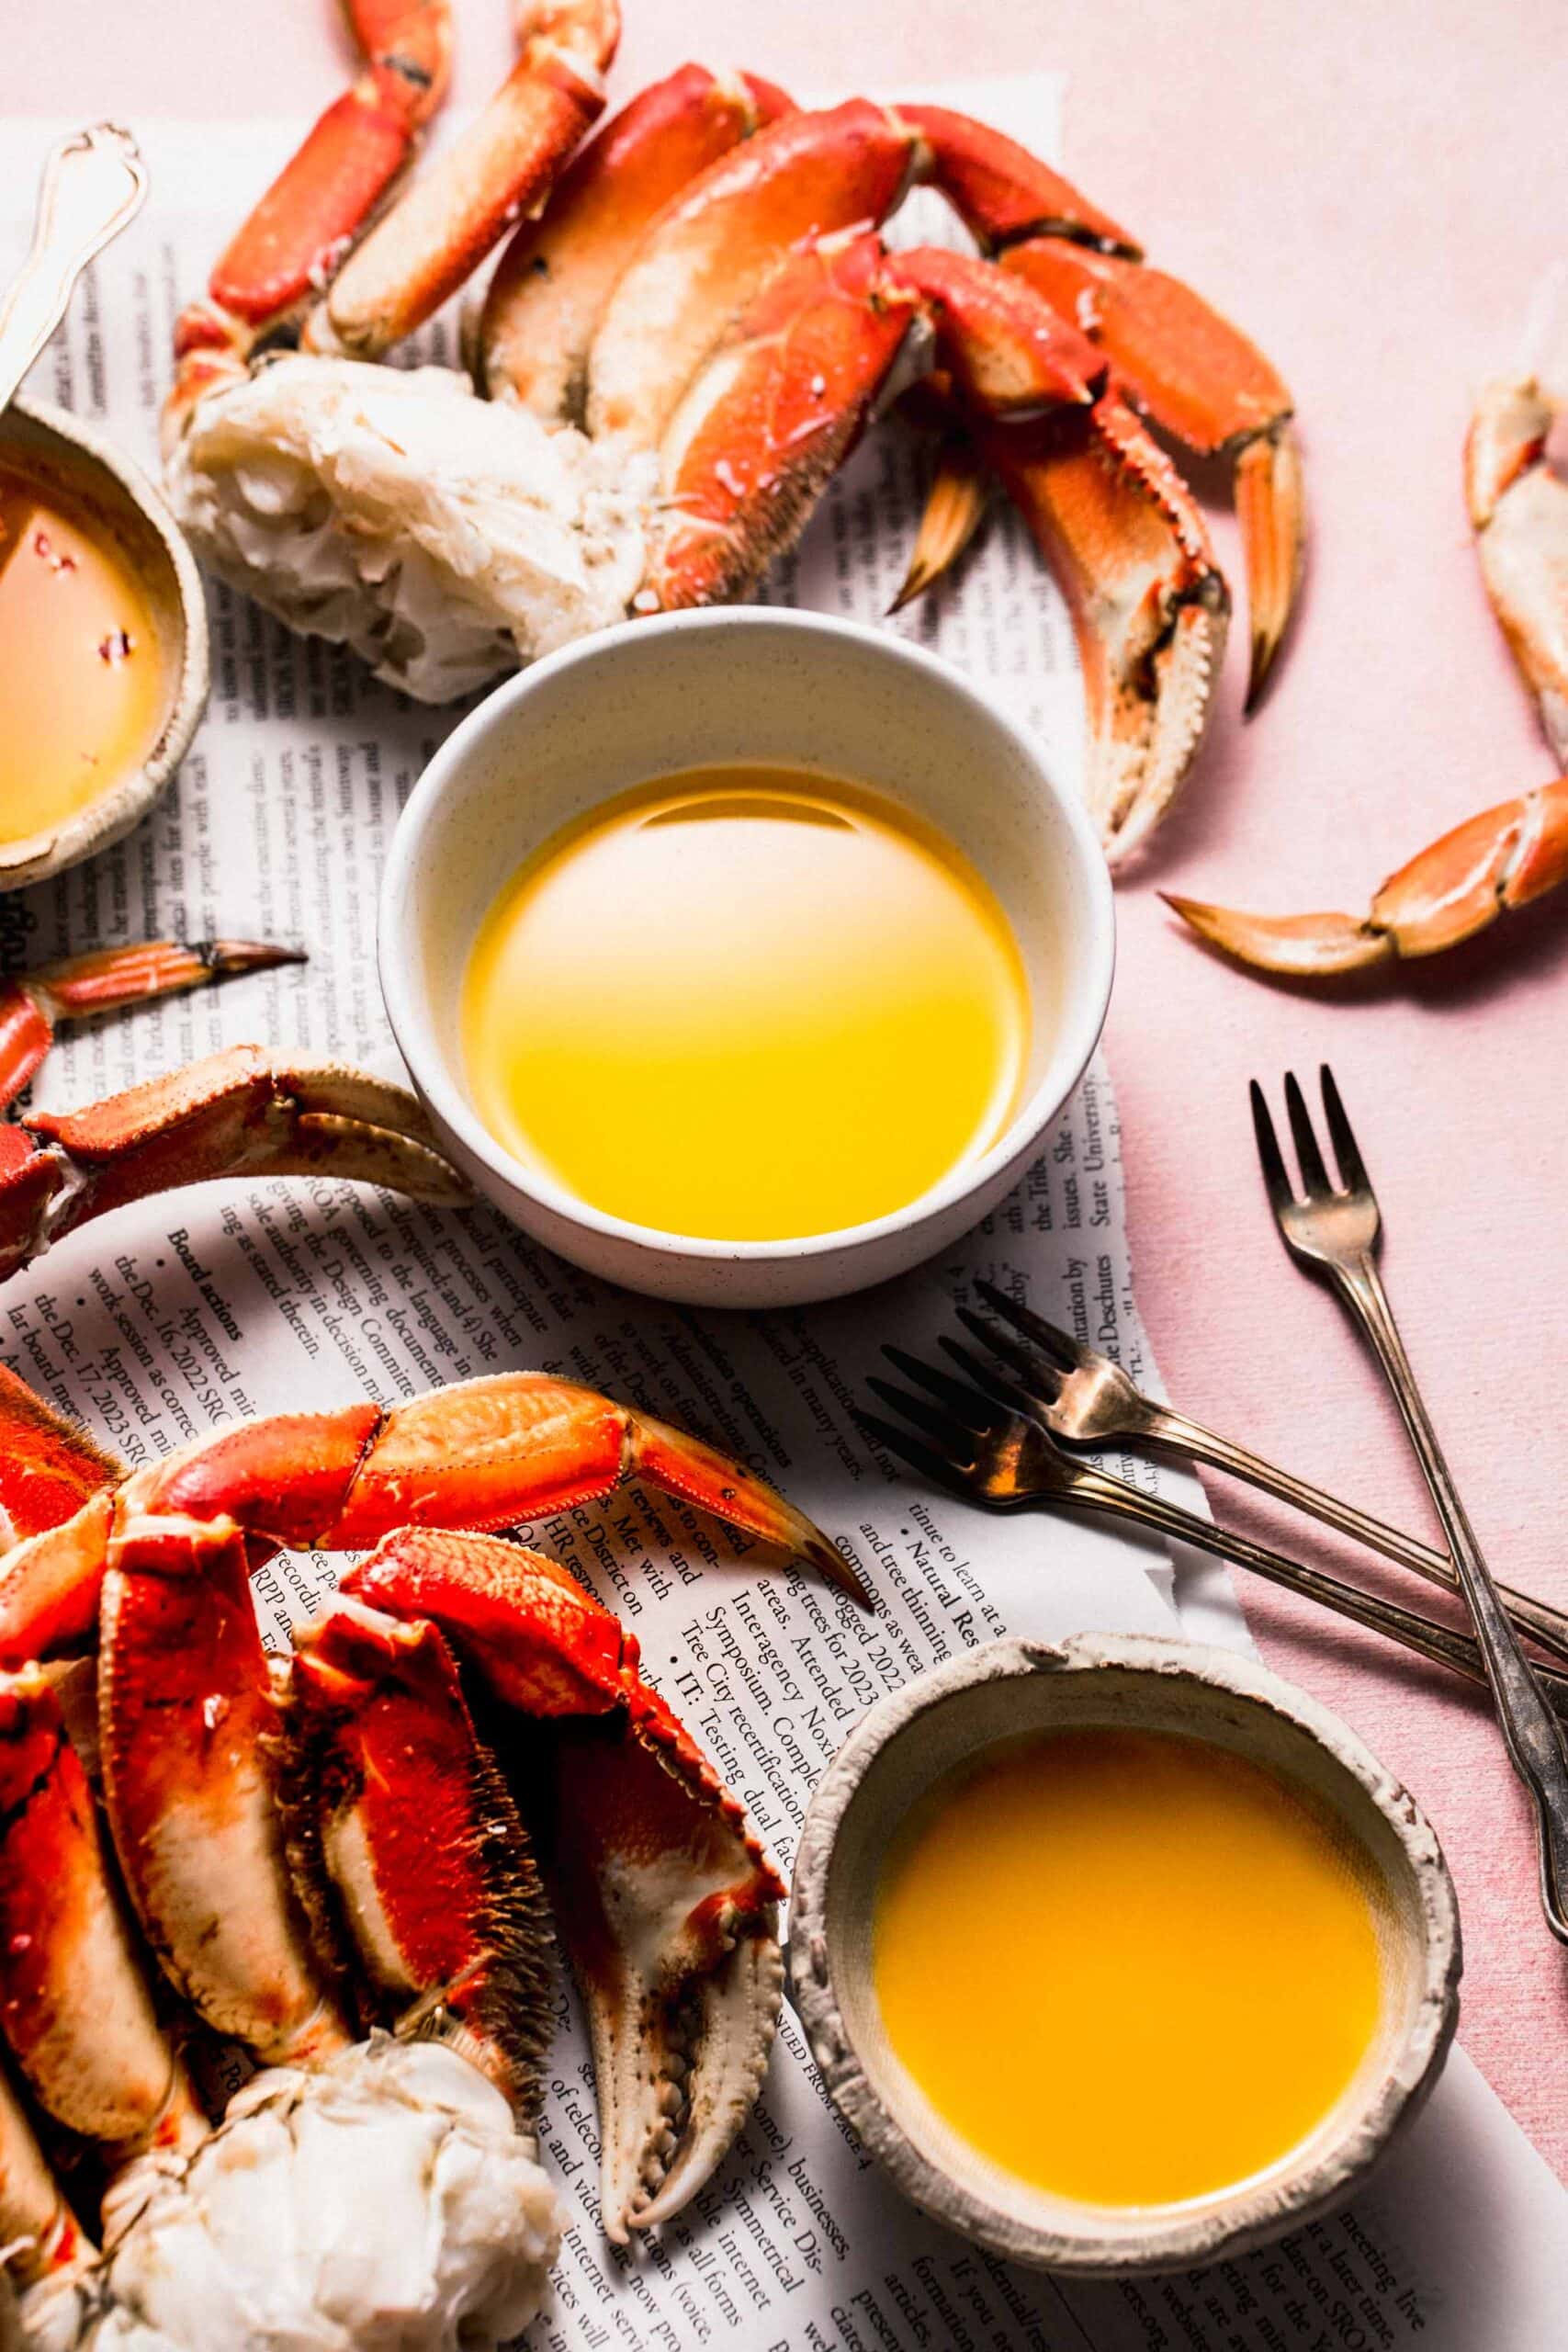 Small bowl of crab butter next to cracked crabs on newspapers.